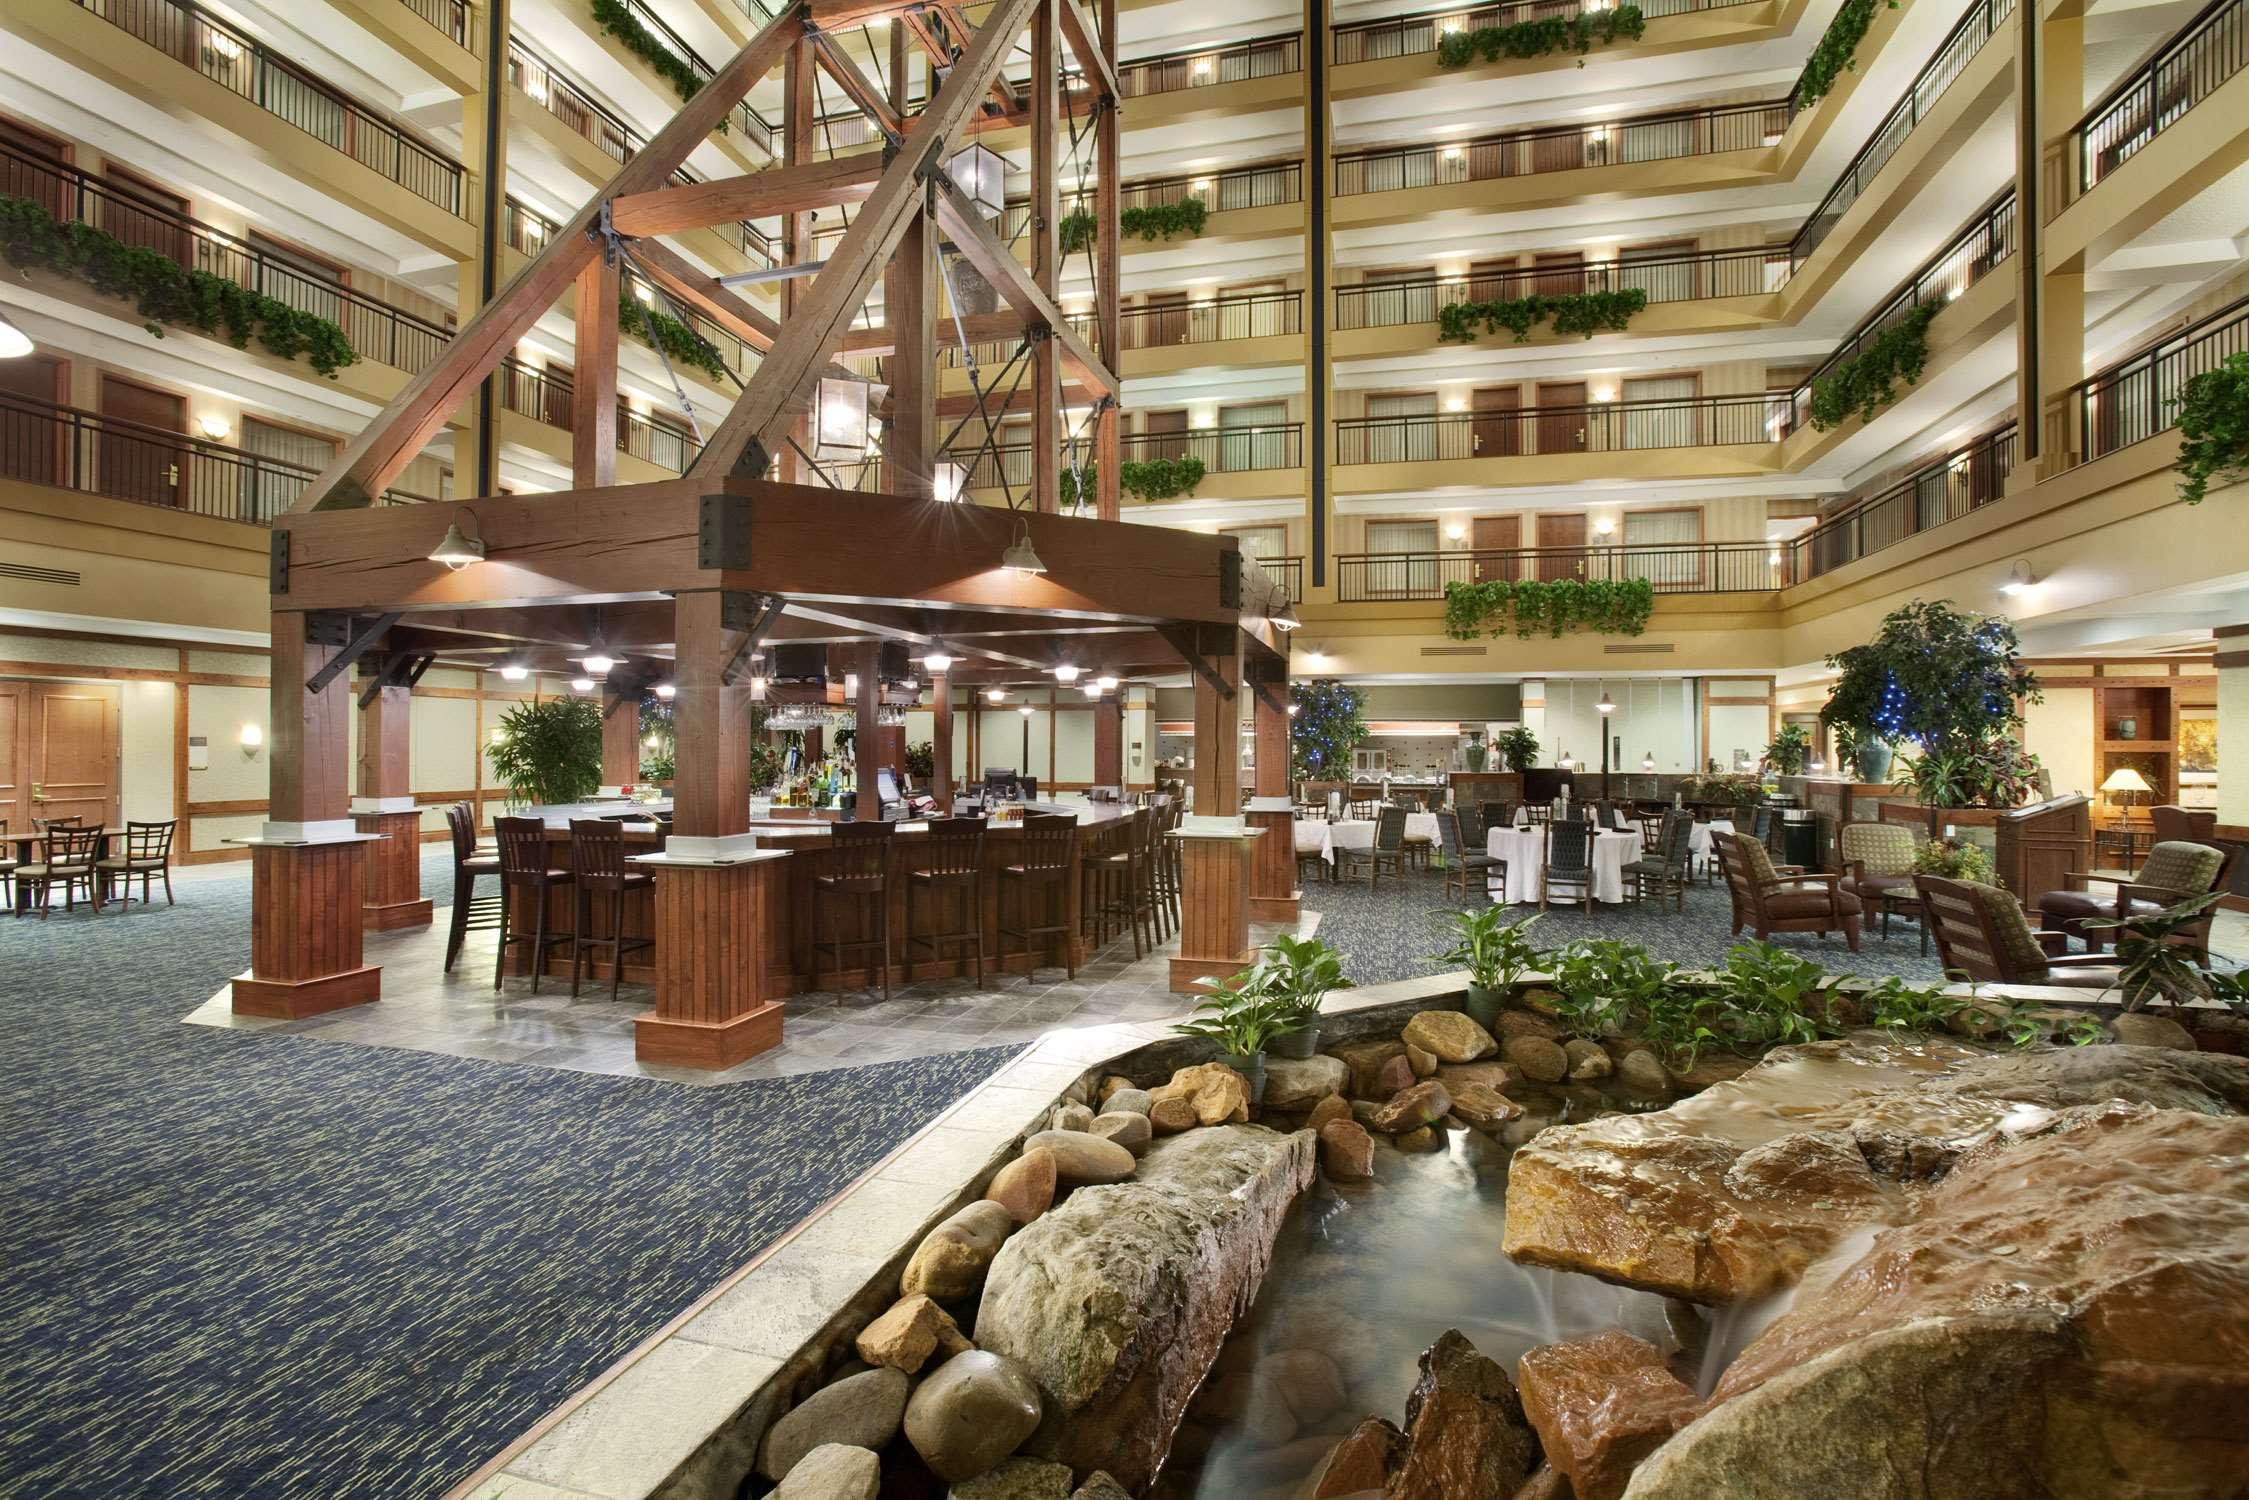 Embassy Suites Hotel, Conference Center slated for north Round Rock